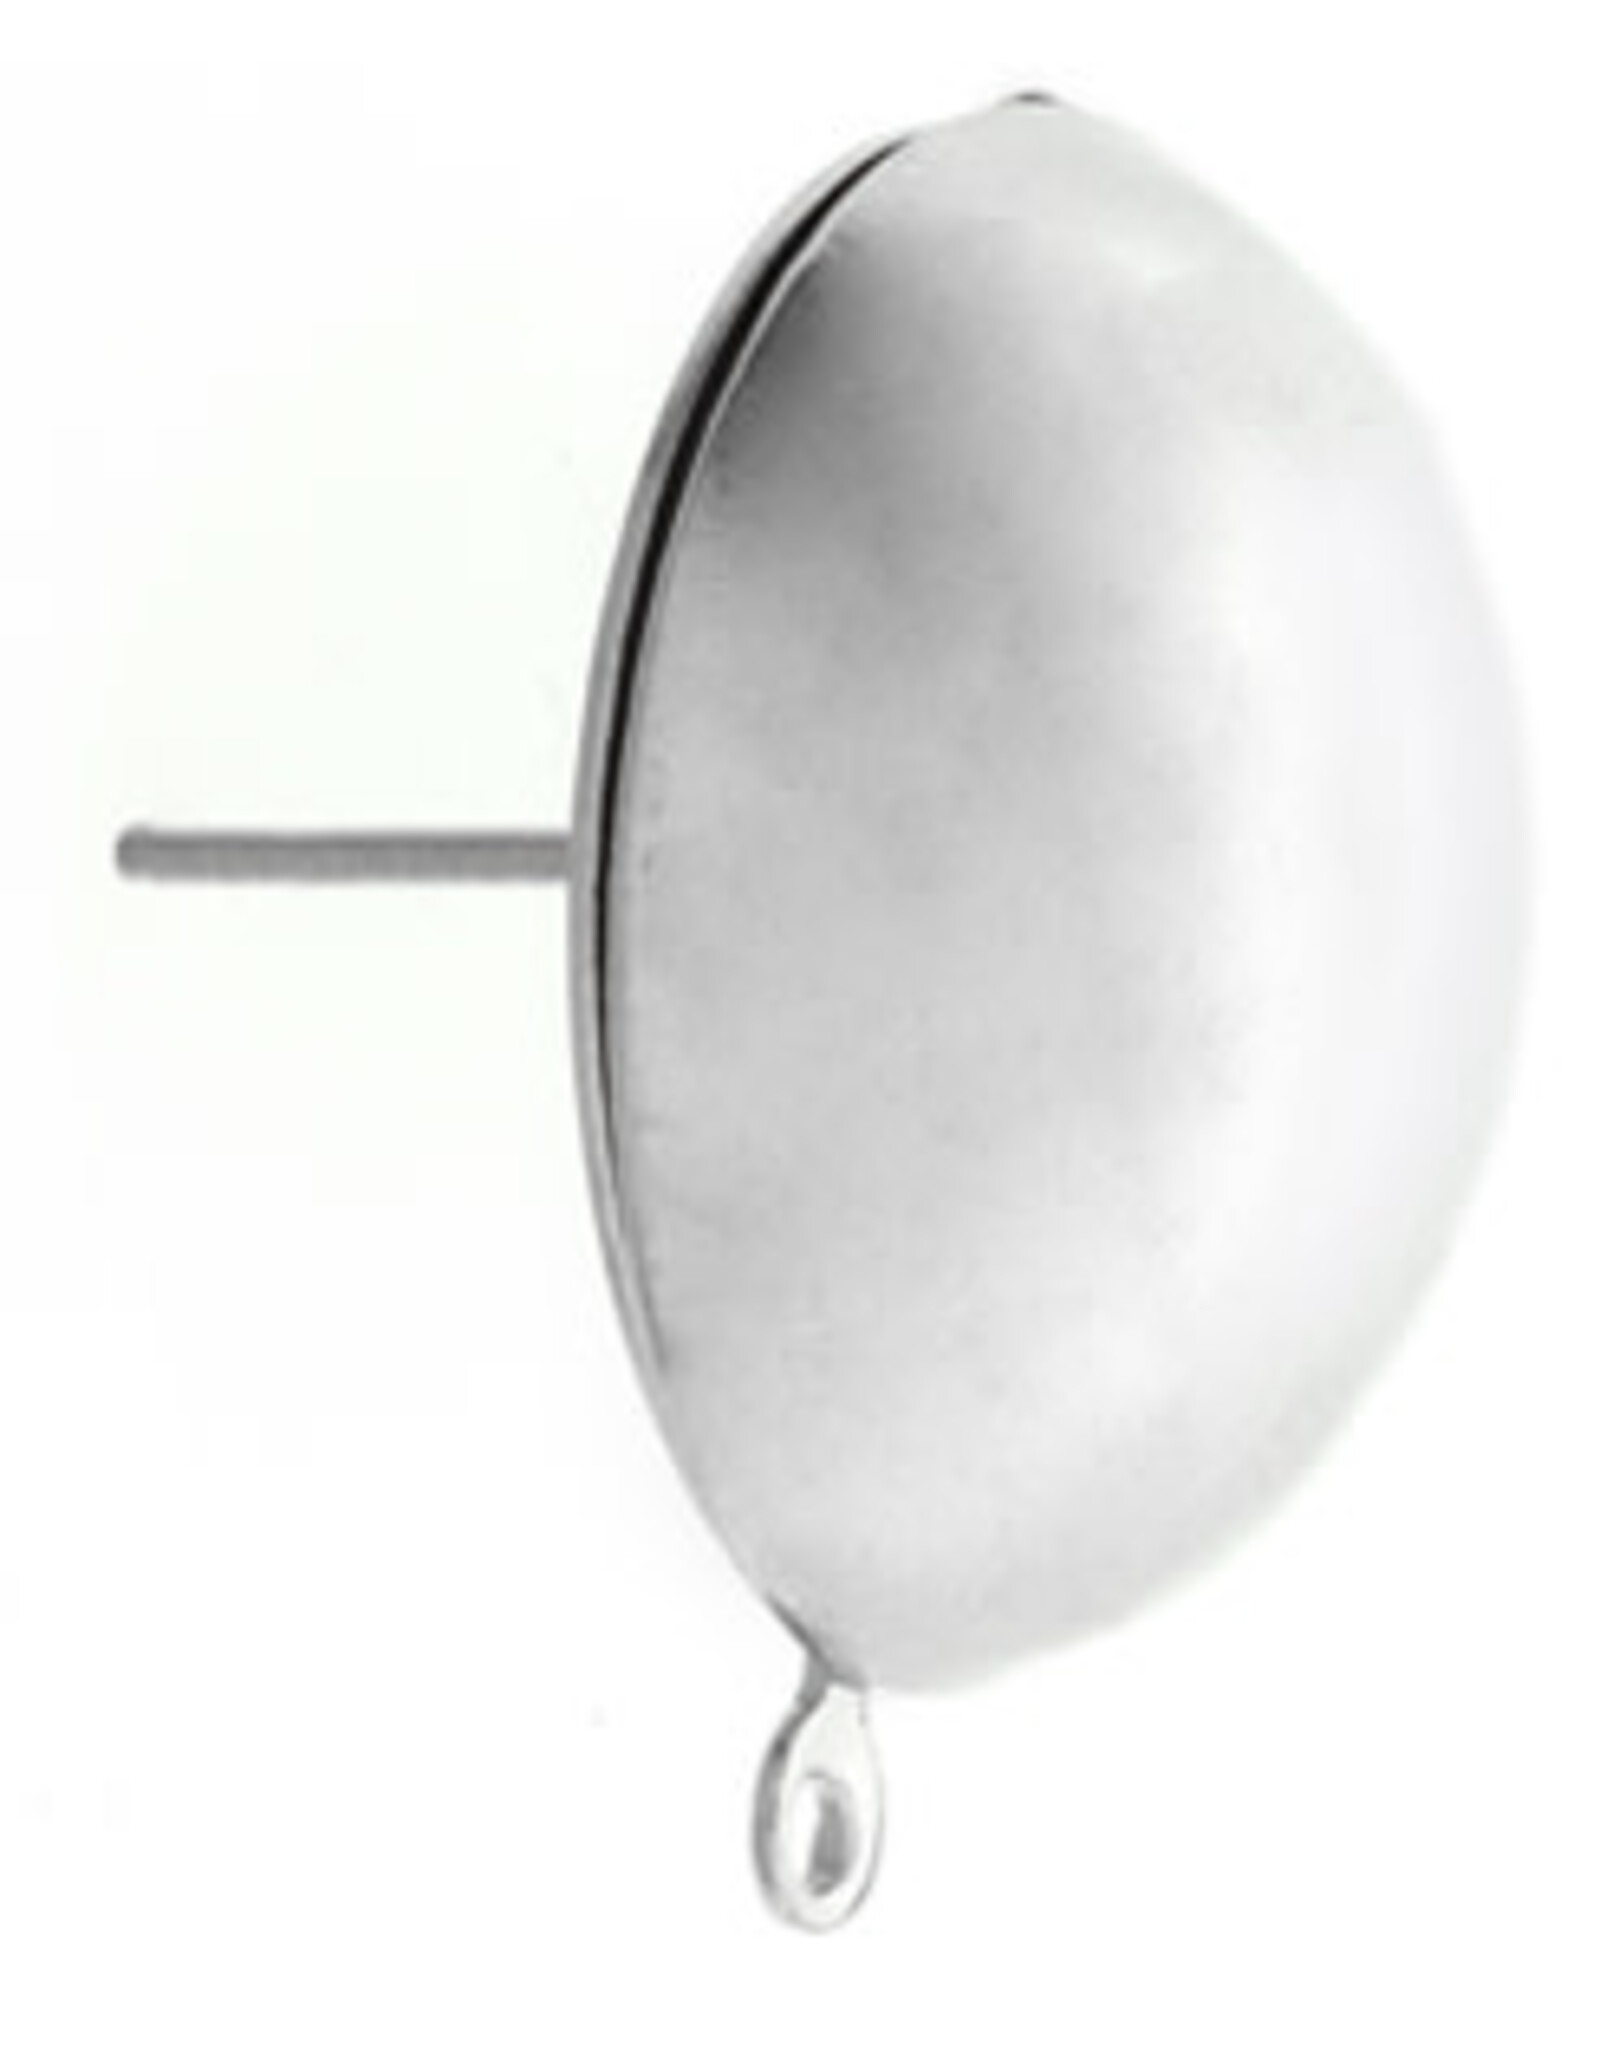 Earring Stud Domed  18mm Nickel Colour  x10